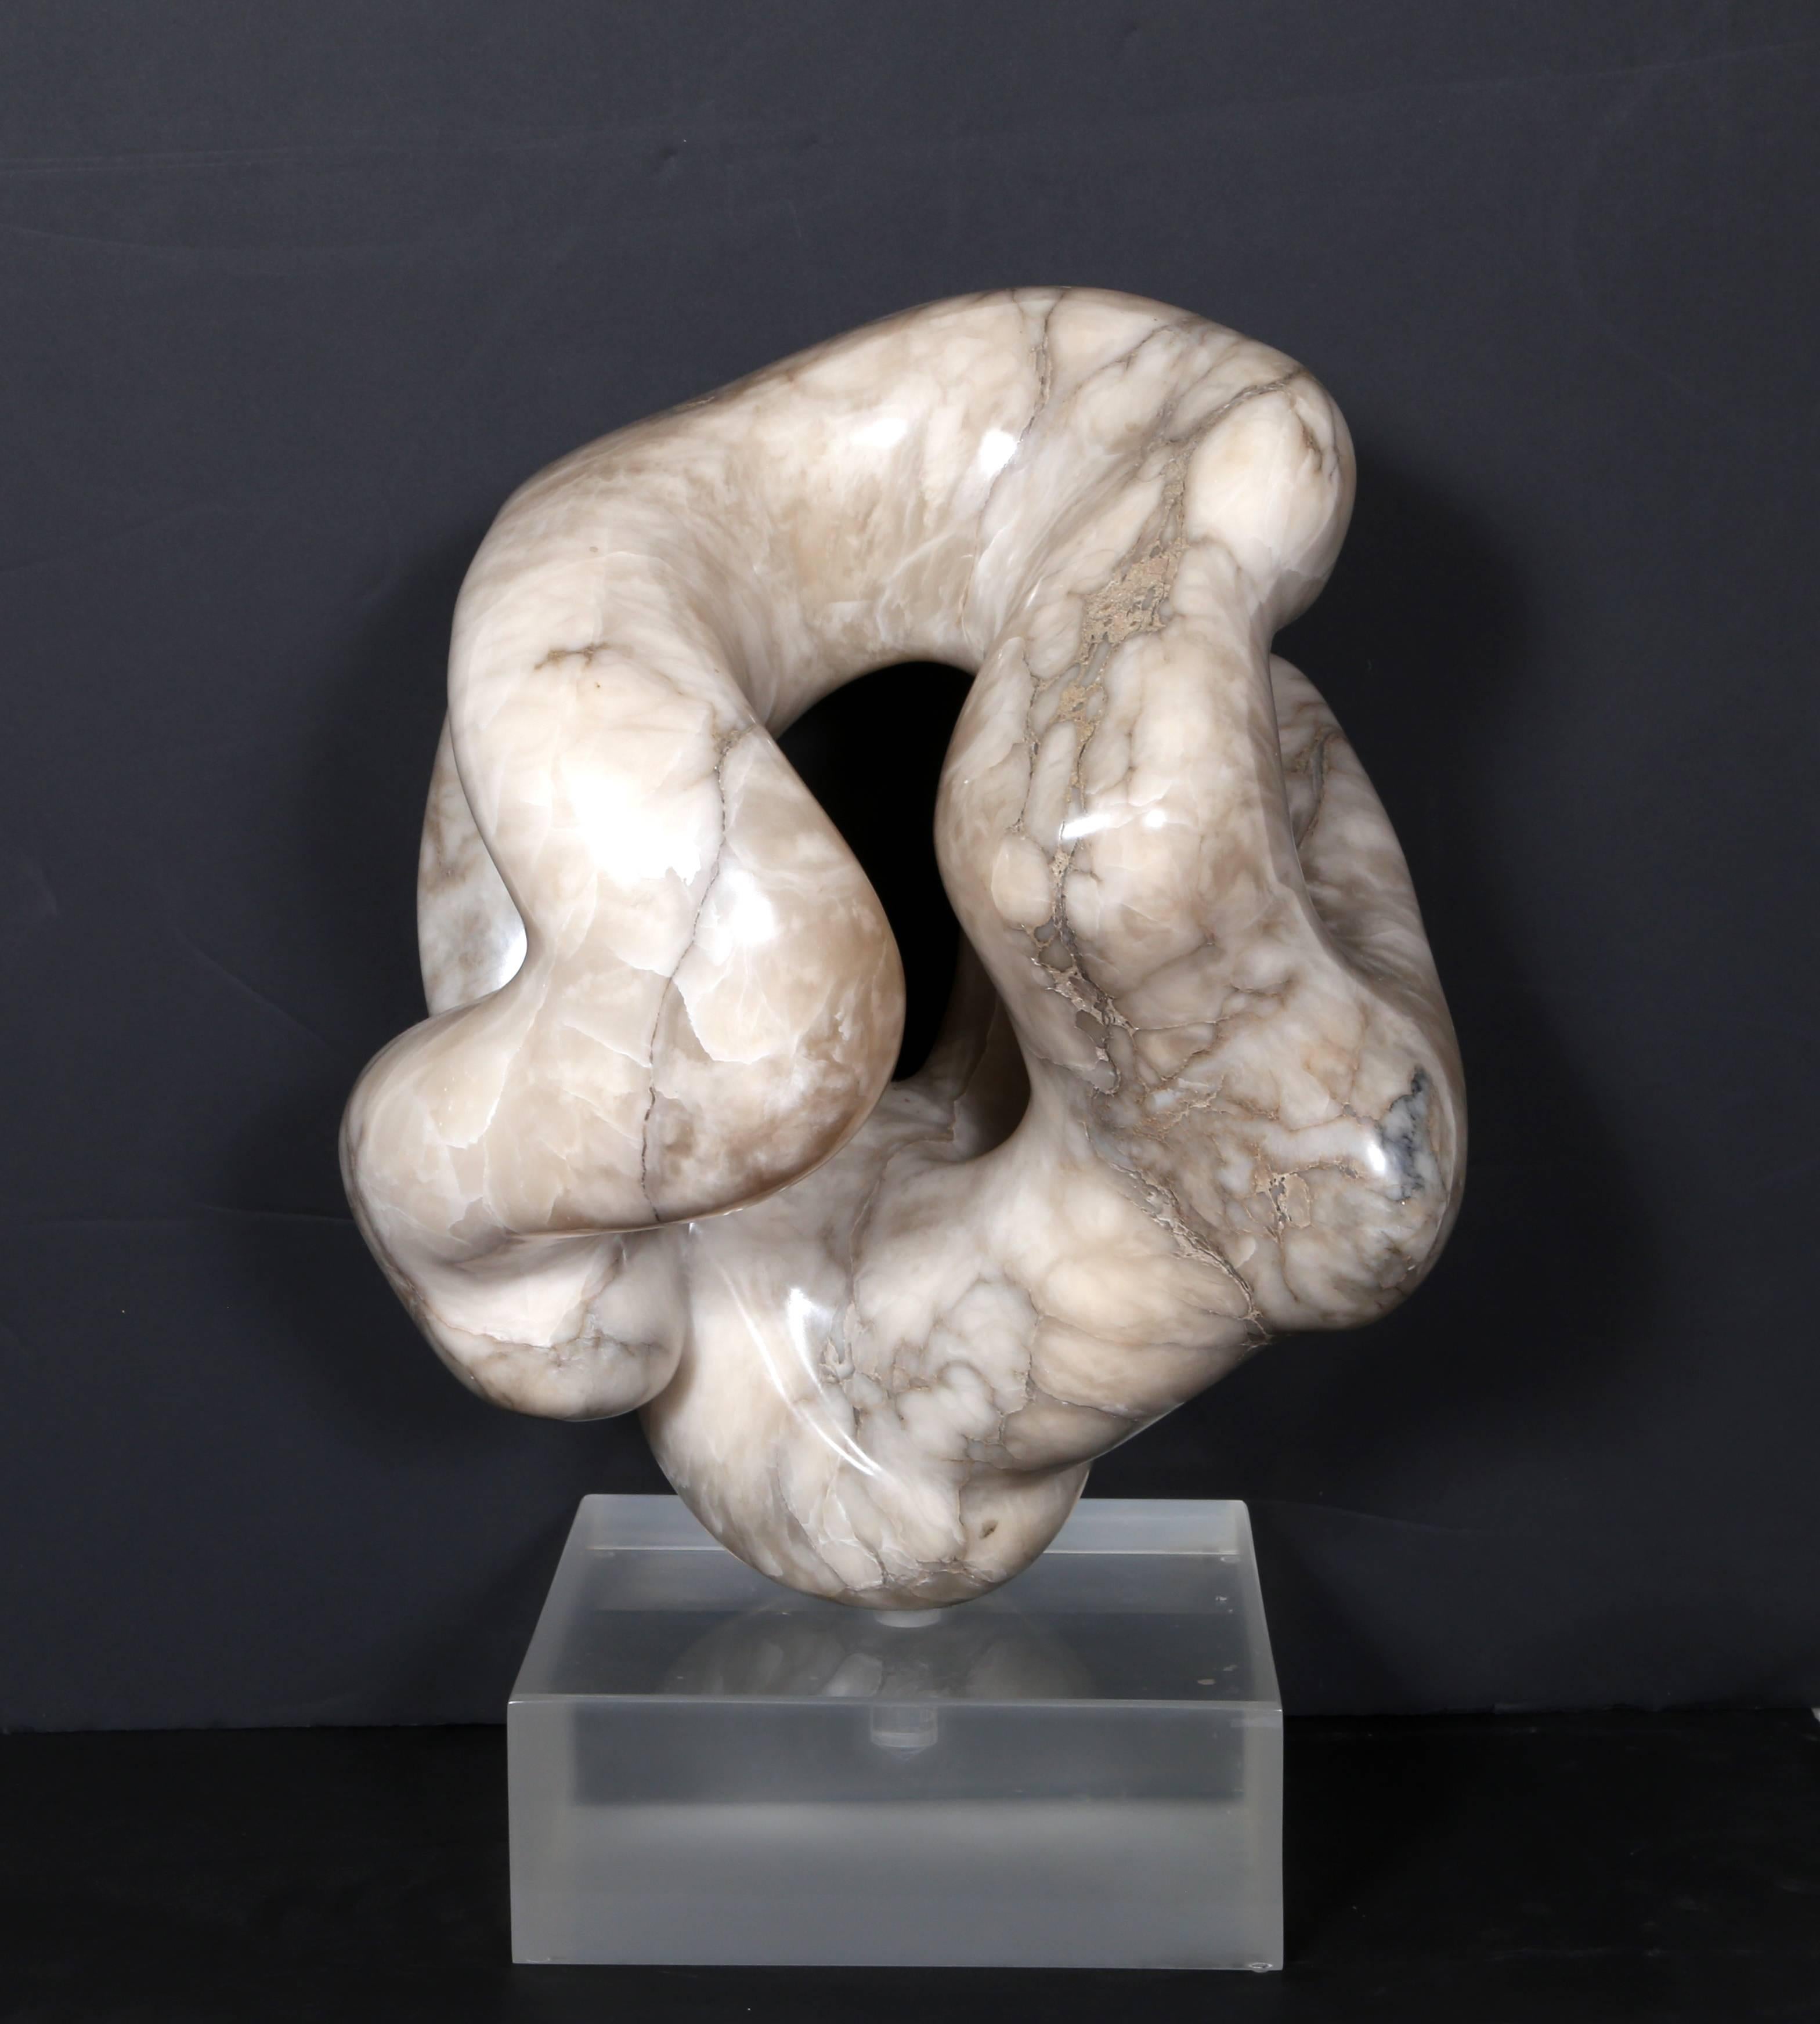 Unique abstract marble sculpture - Abstract Sculpture by Bruno Facchini